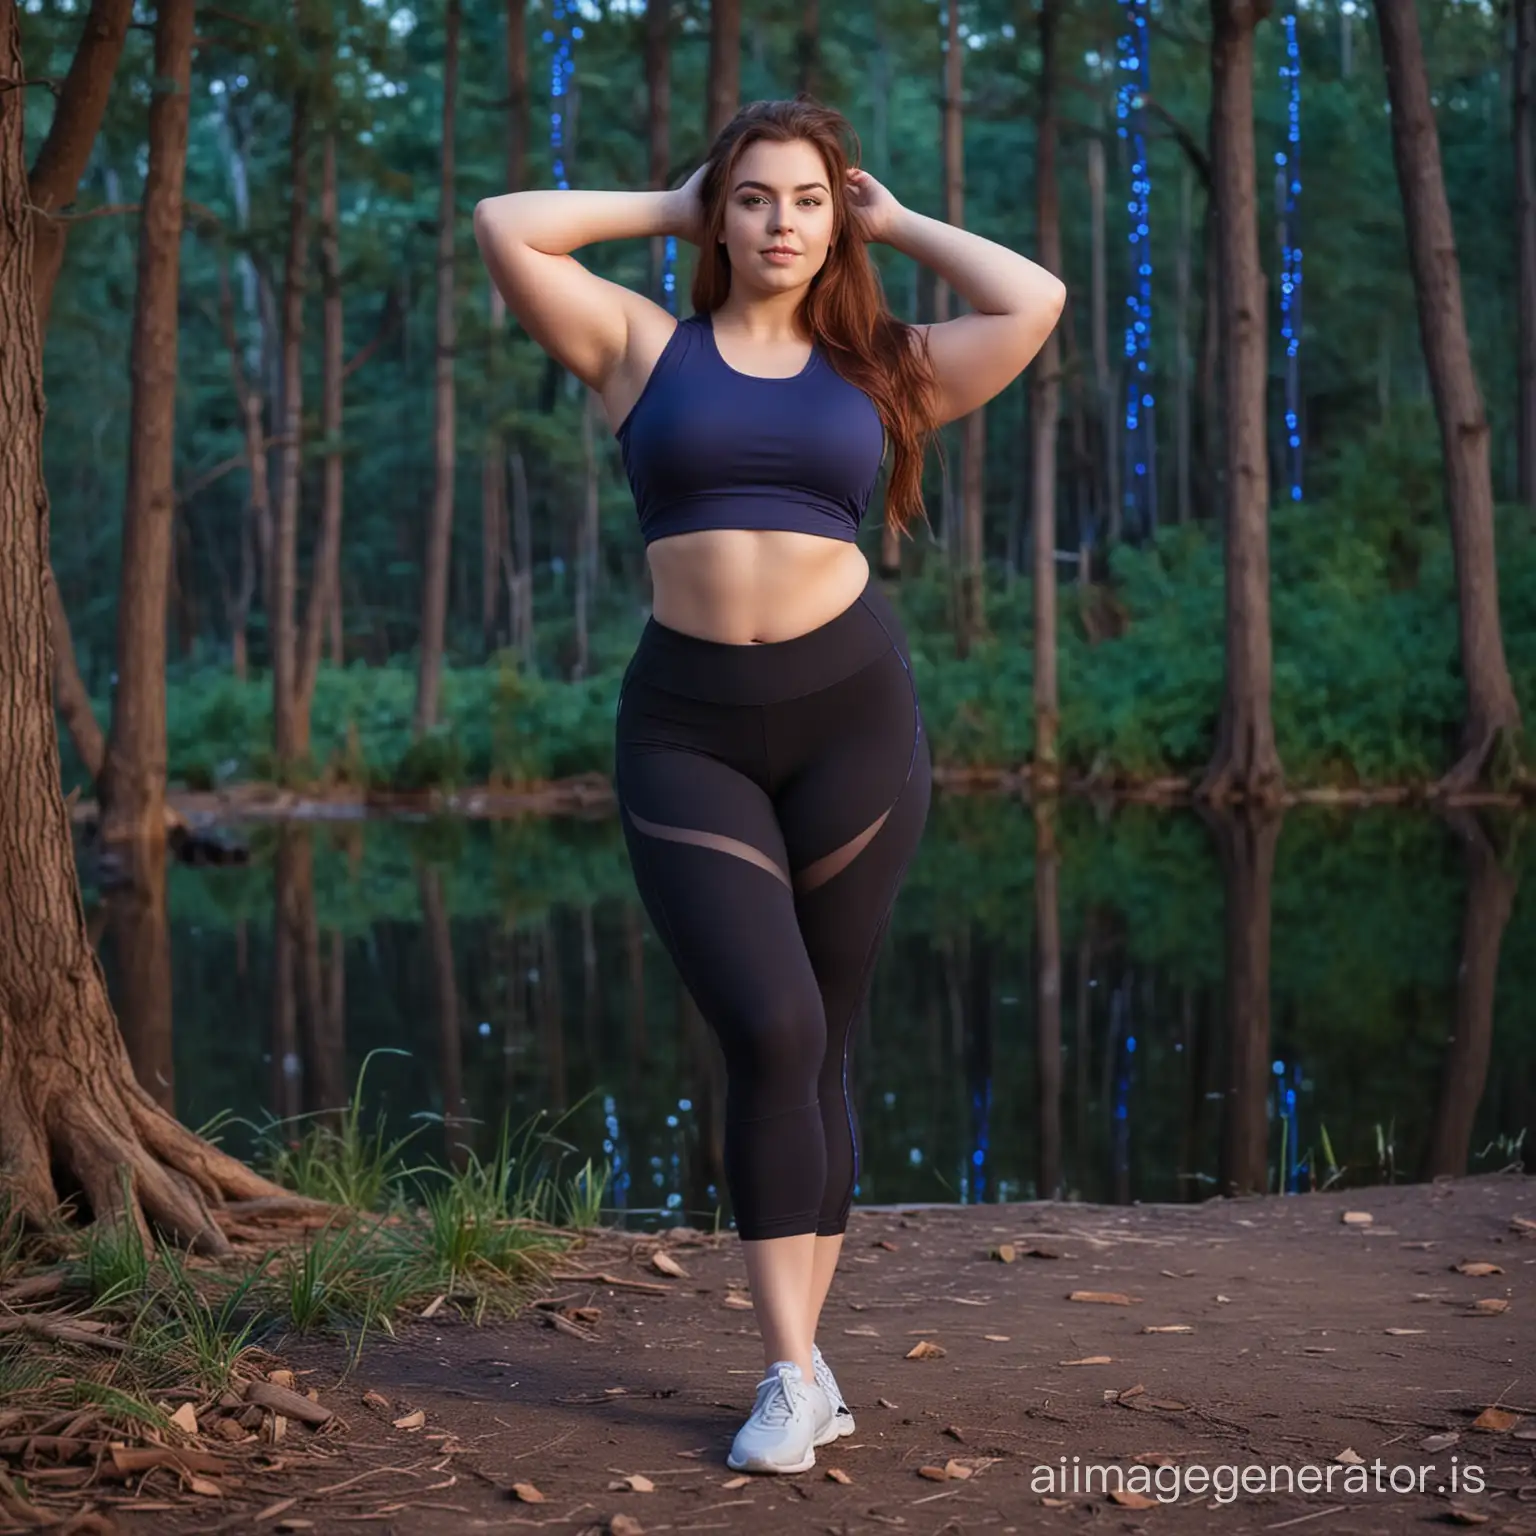 Twenty years old auburn curvy girl stretching in cropped 3/4 leggings and top outdoor magical blue purple lights marvellous forest lake scene